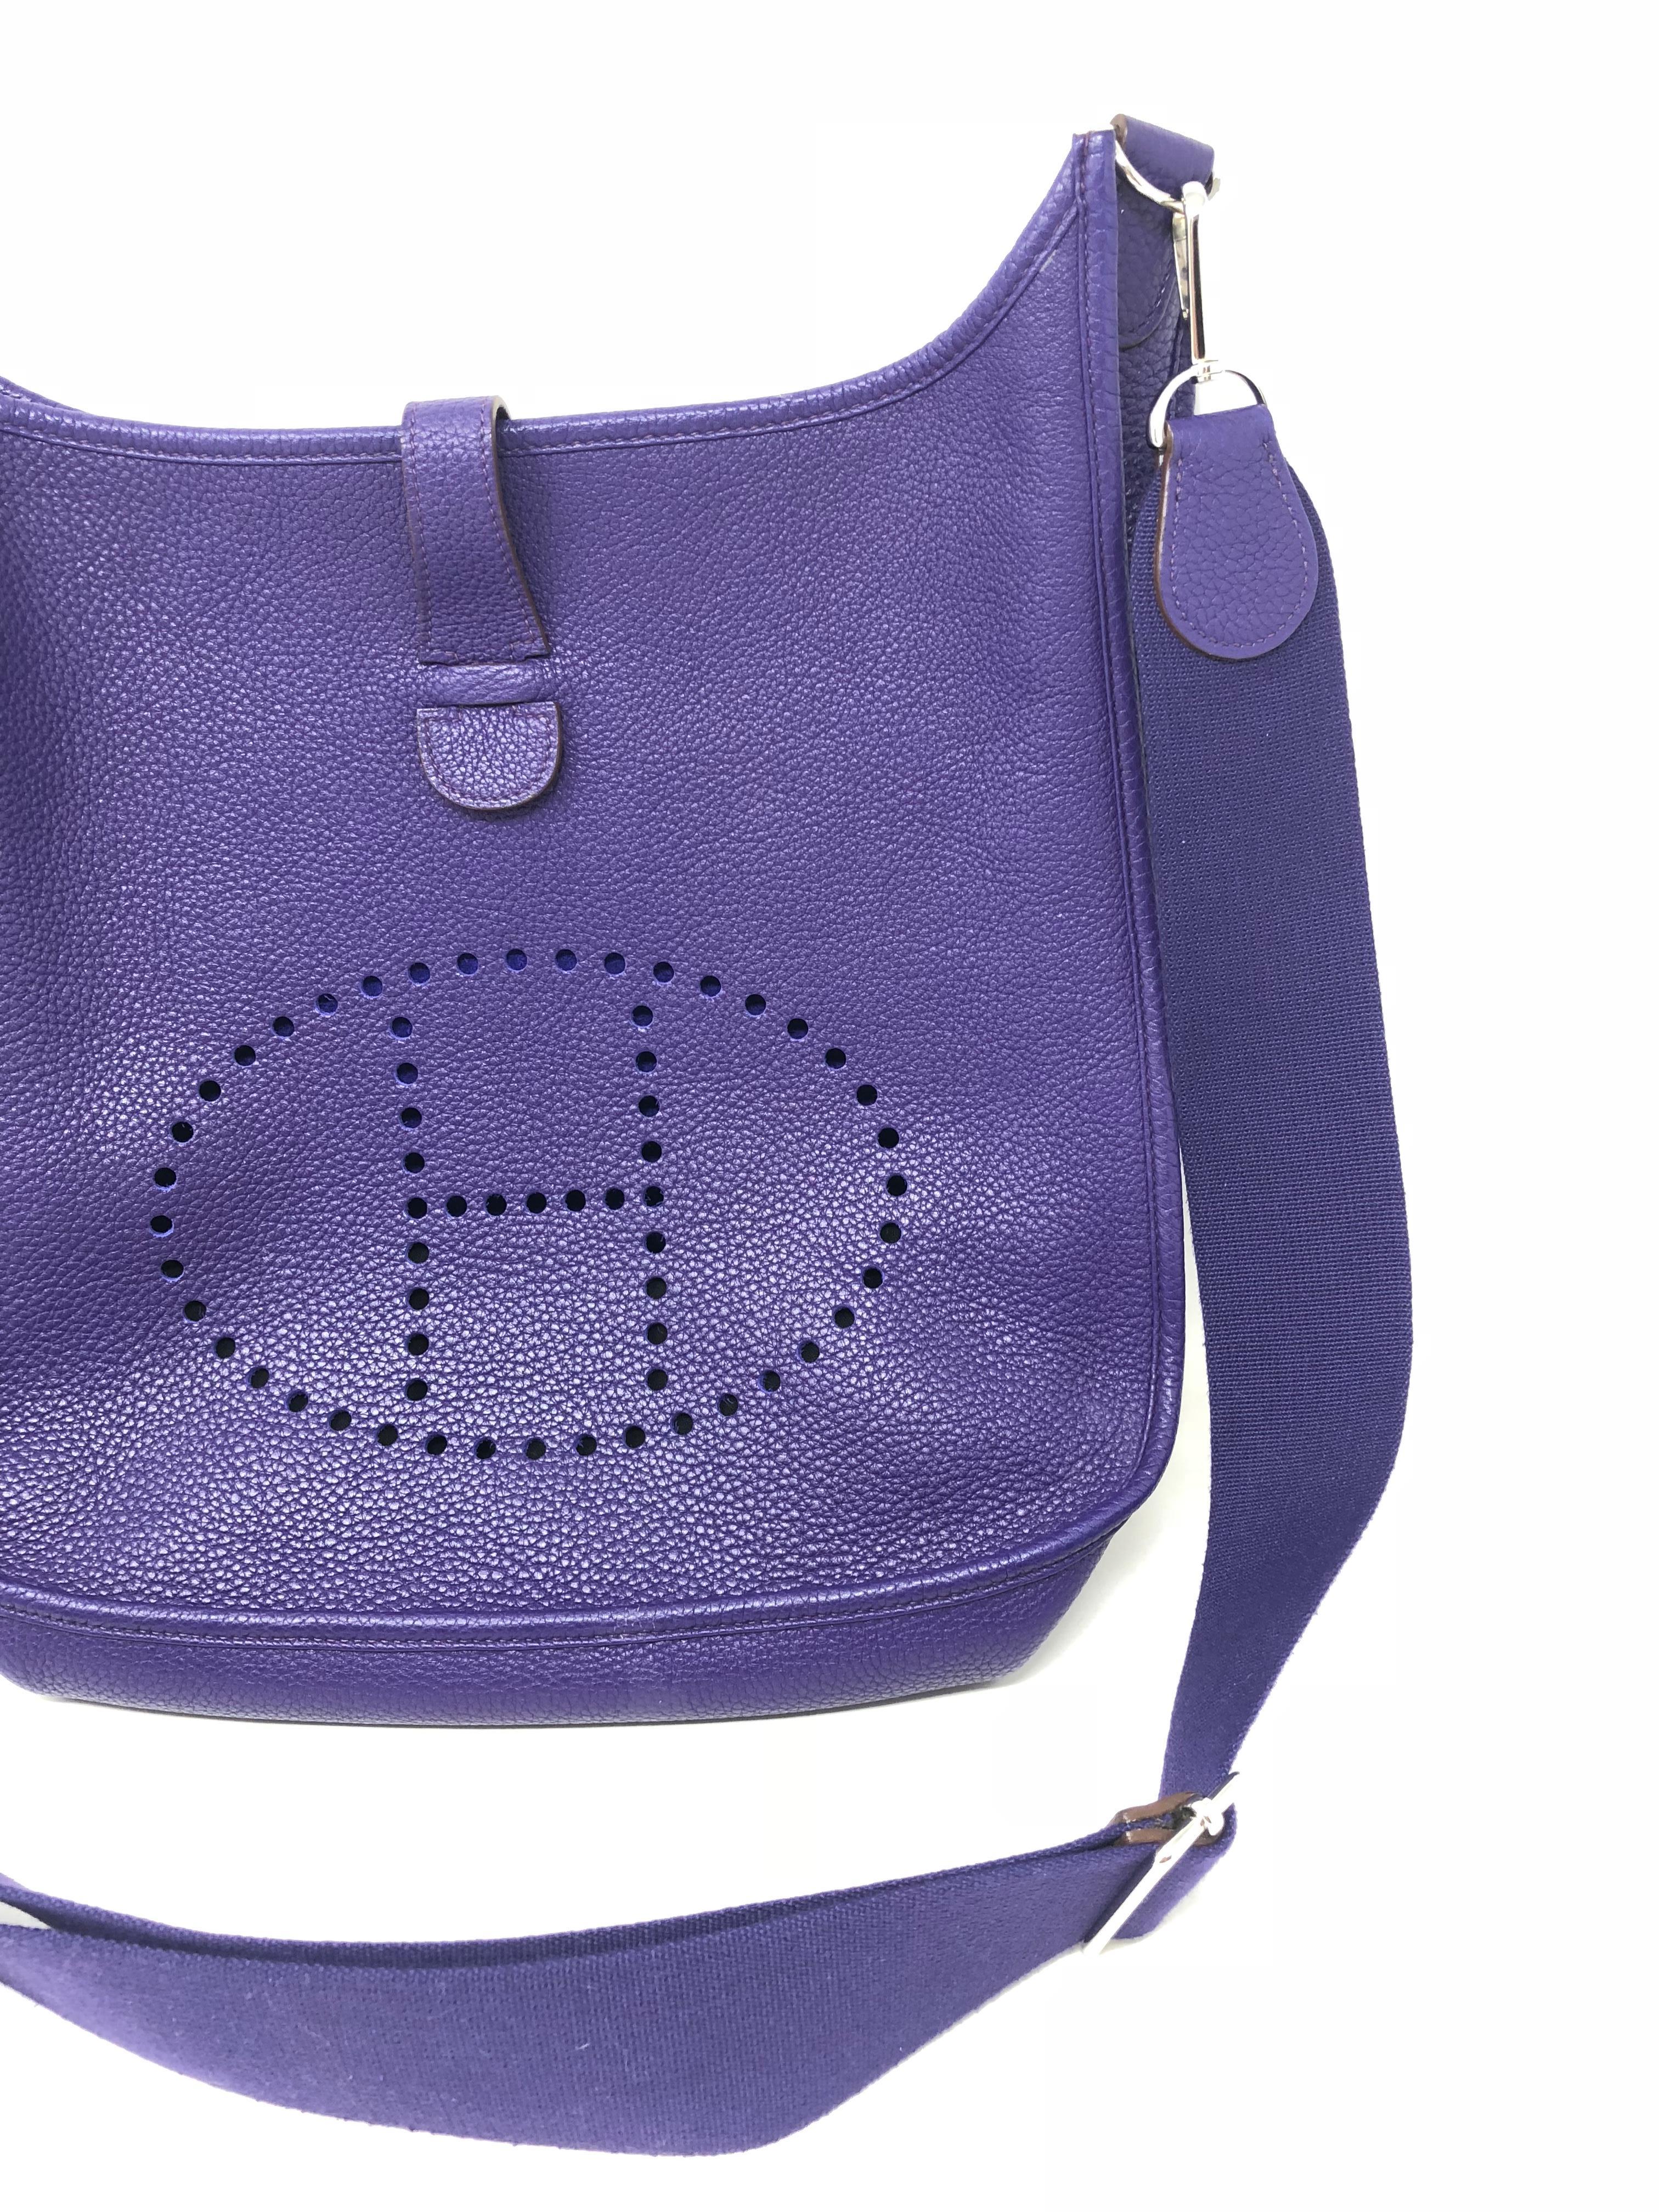 Hermes Evelyne GM Bag in Purple leather. Togo leather in a rare purple color. Mint condition. Newest series with adjustable strap. Most wanted and hardest to find color. Guaranteed authentic. 